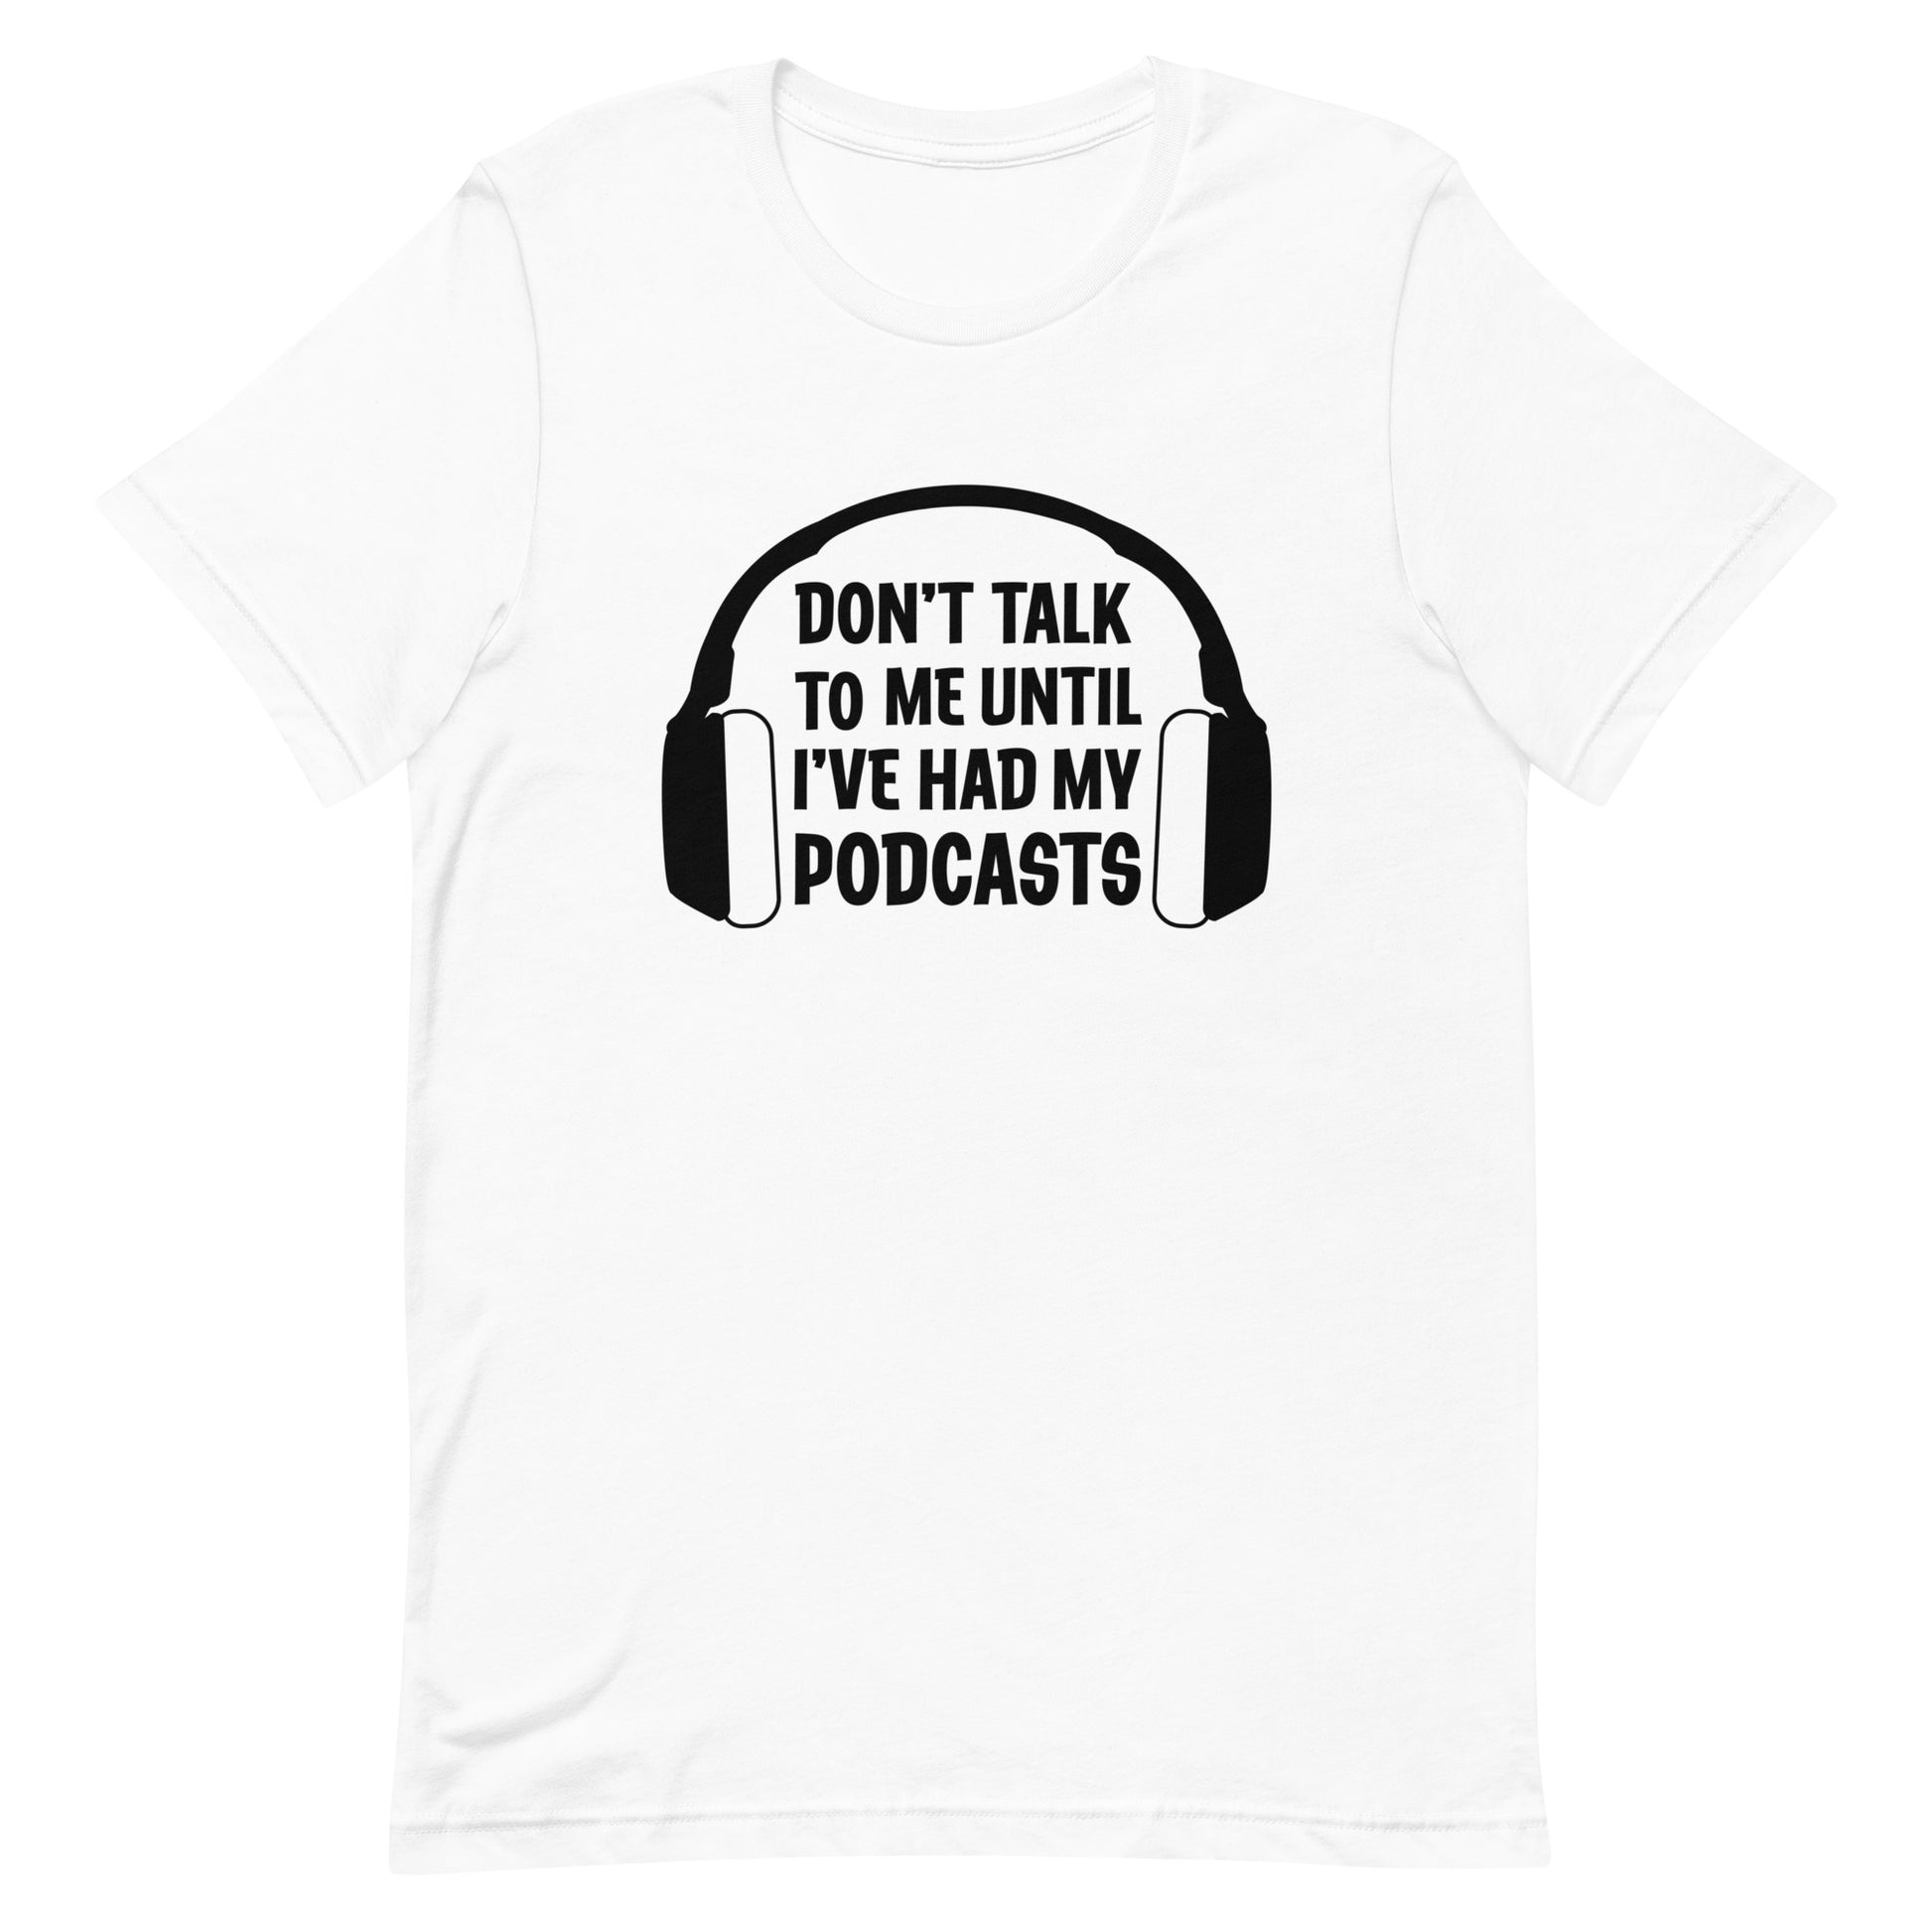 A white crewneck t-shirt featuring an image of headphones surrounding text reading "Don't talk to me until I've had my podcasts"